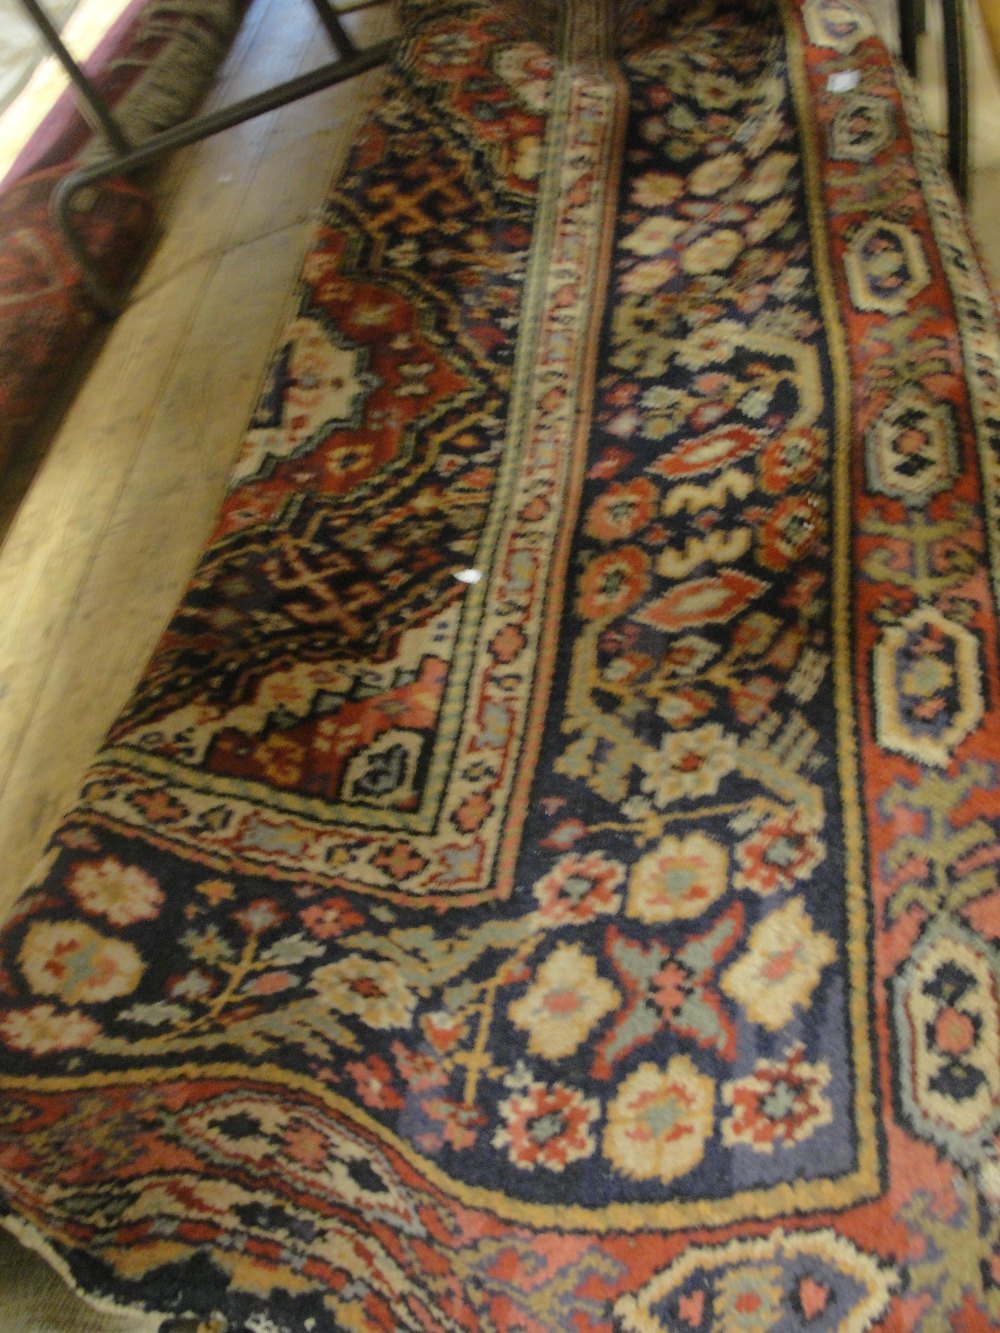 A very large multi-colour rug